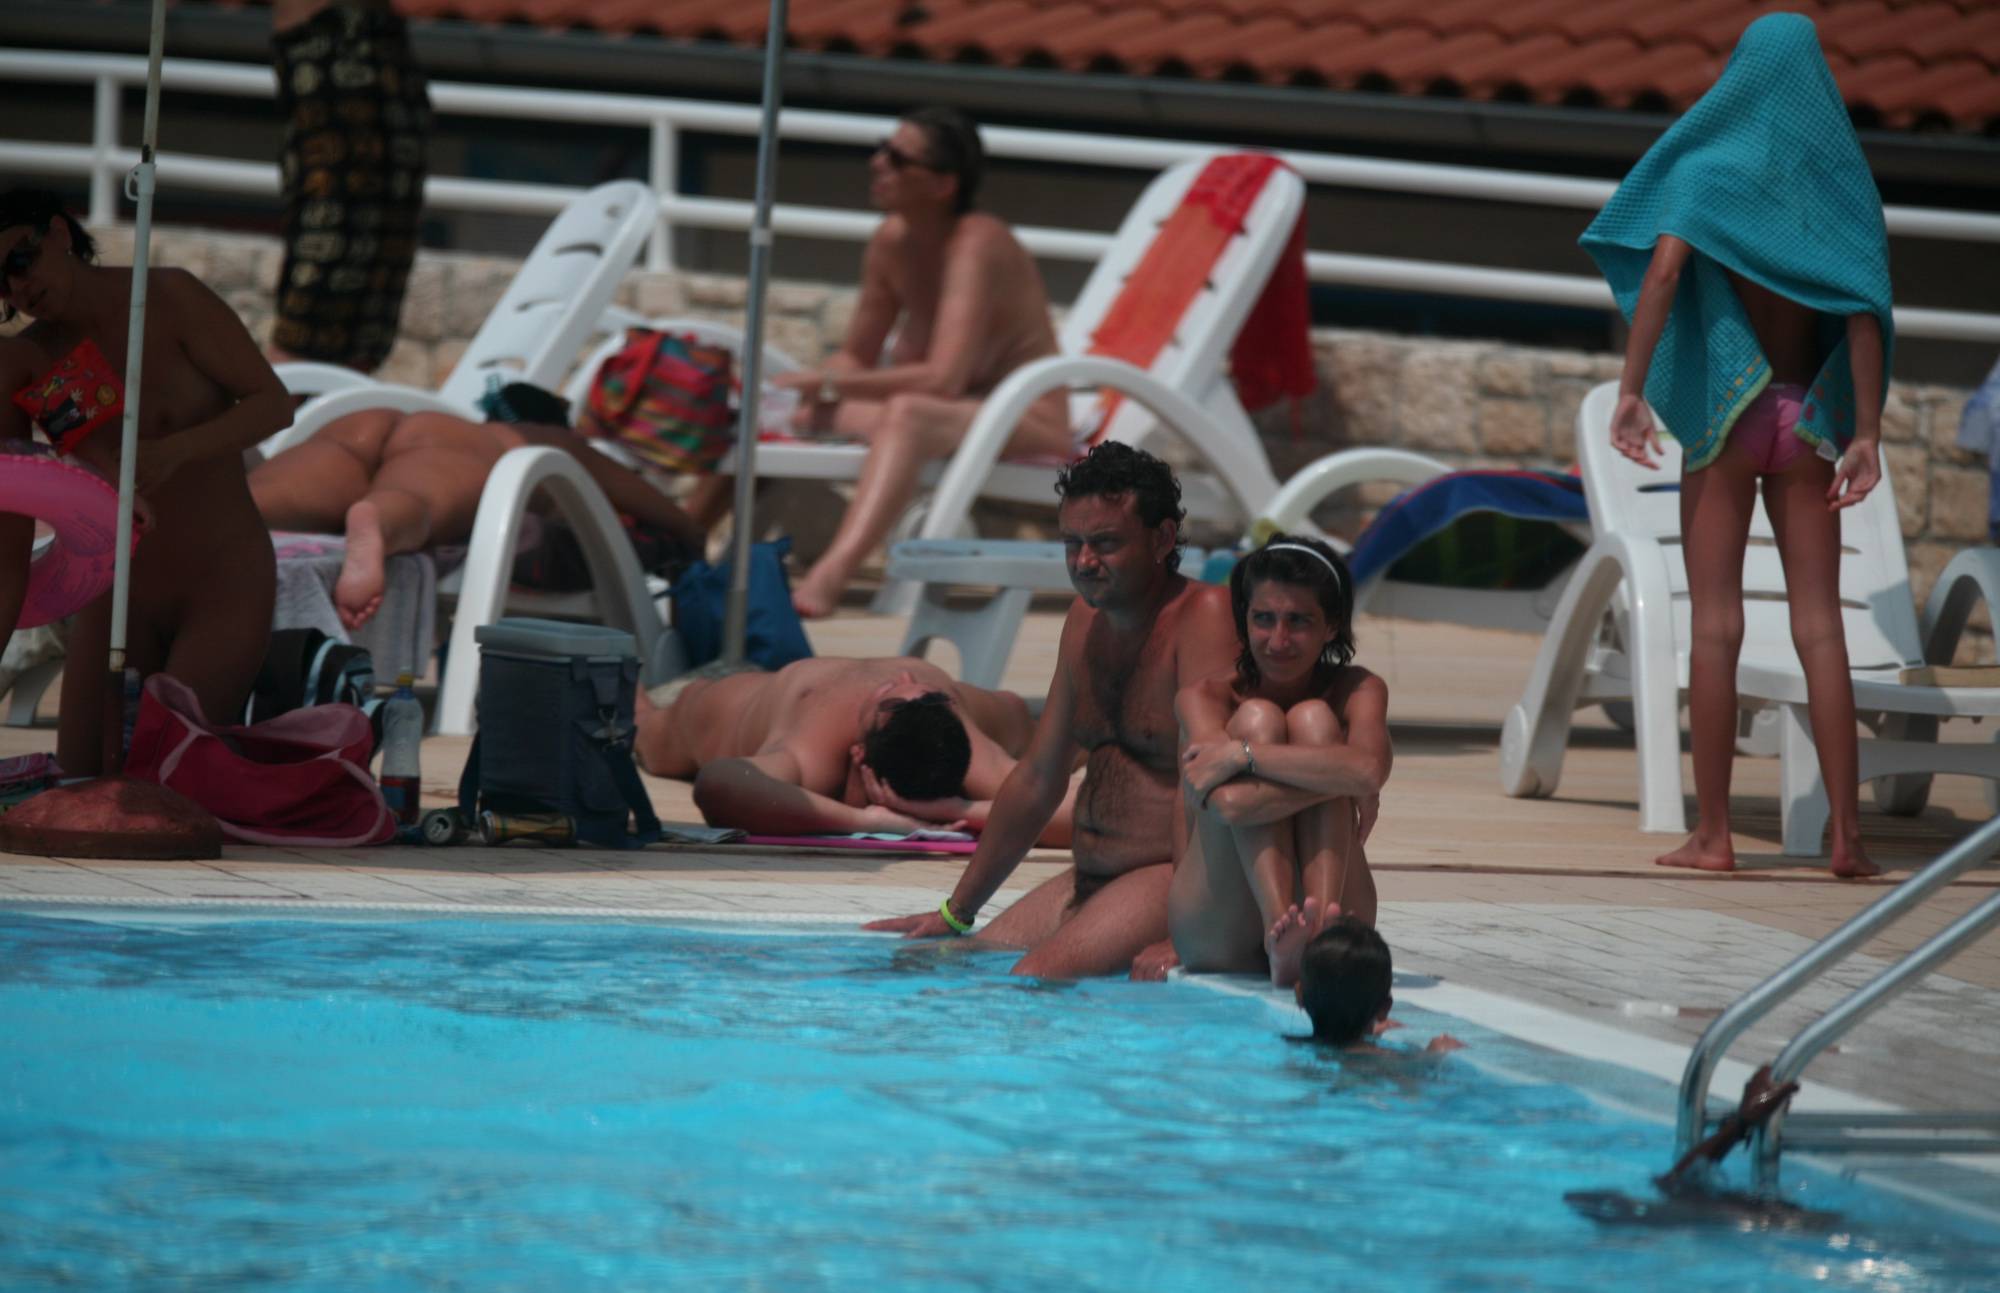 Naturist Pool Youngsters - 3